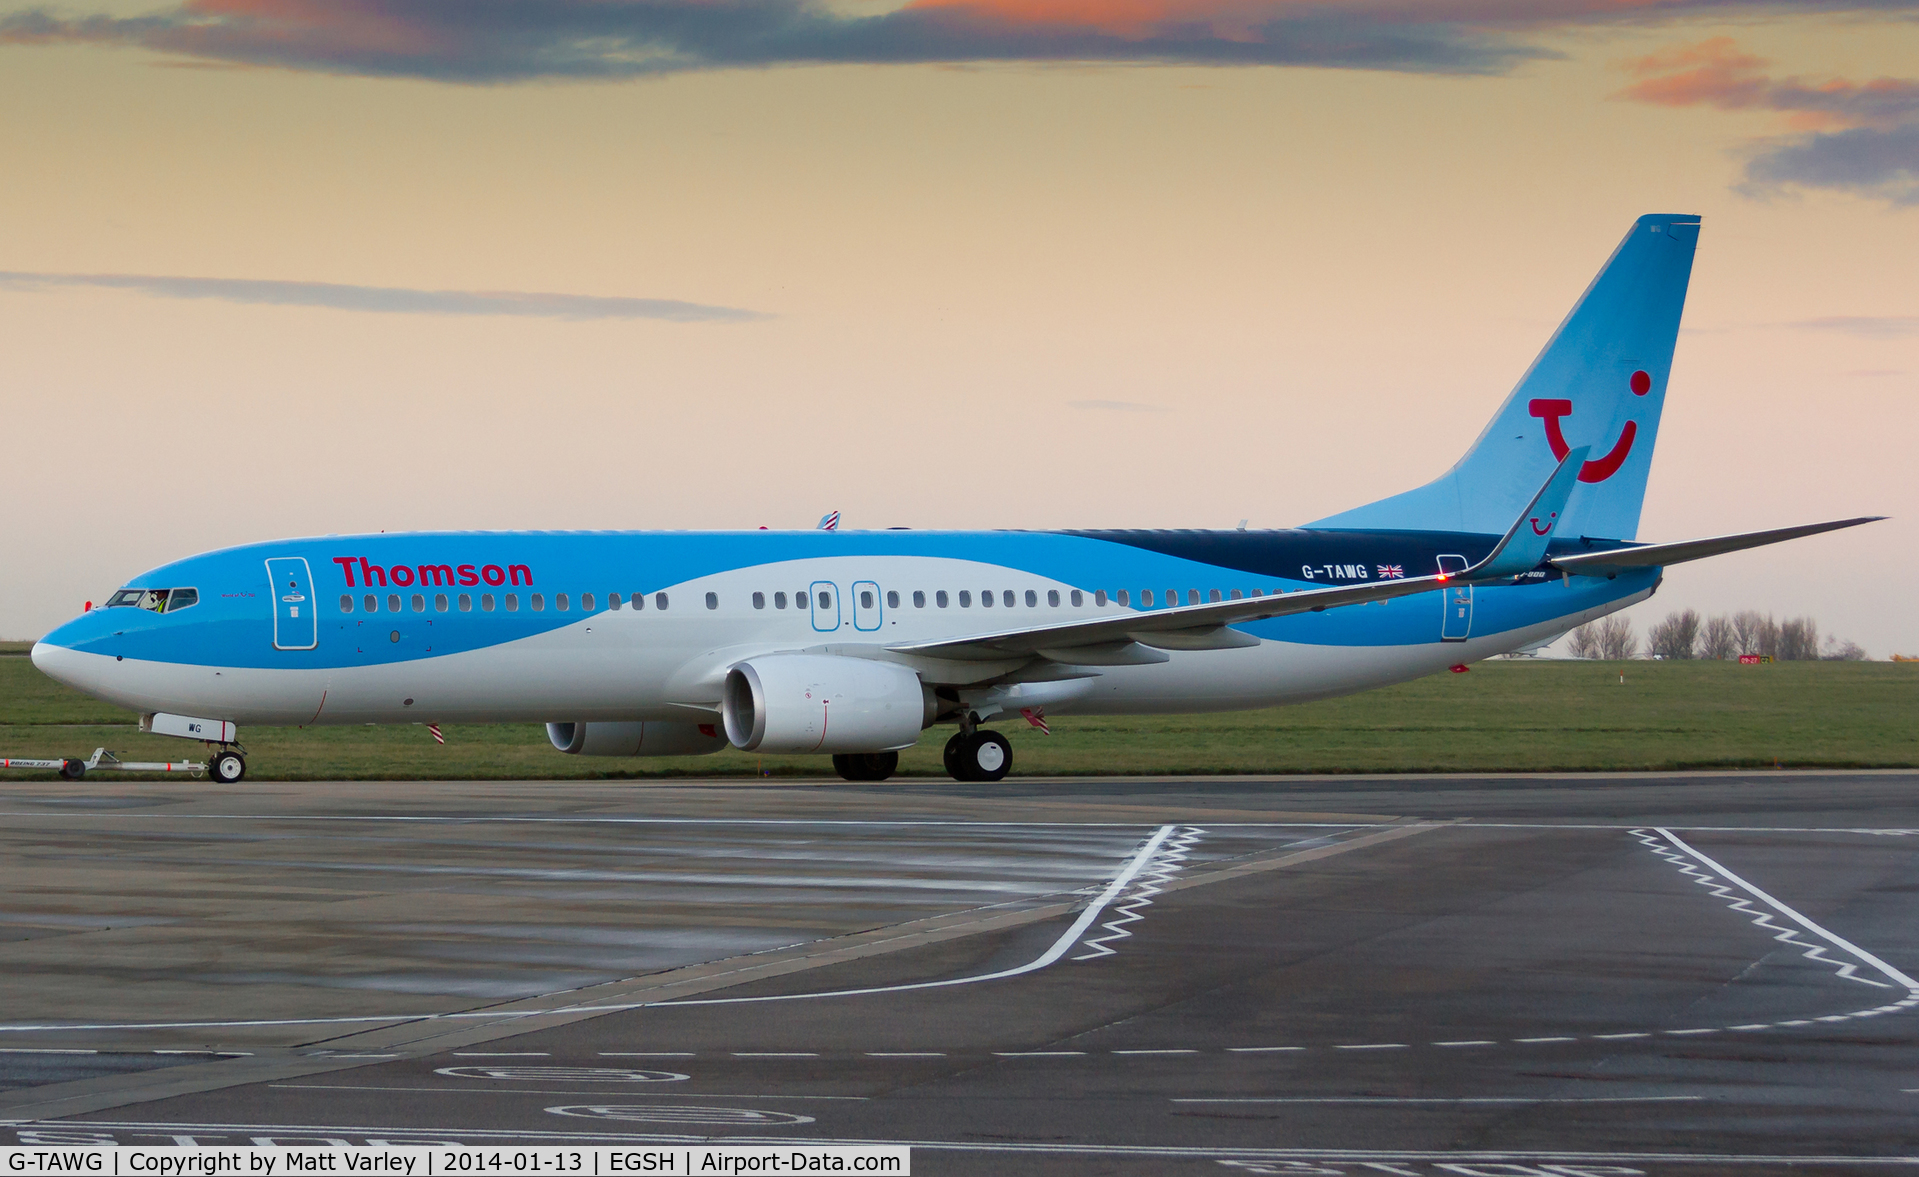 G-TAWG, 2012 Boeing 737-8K5 C/N 37266, Being pulled to stand after sun set....